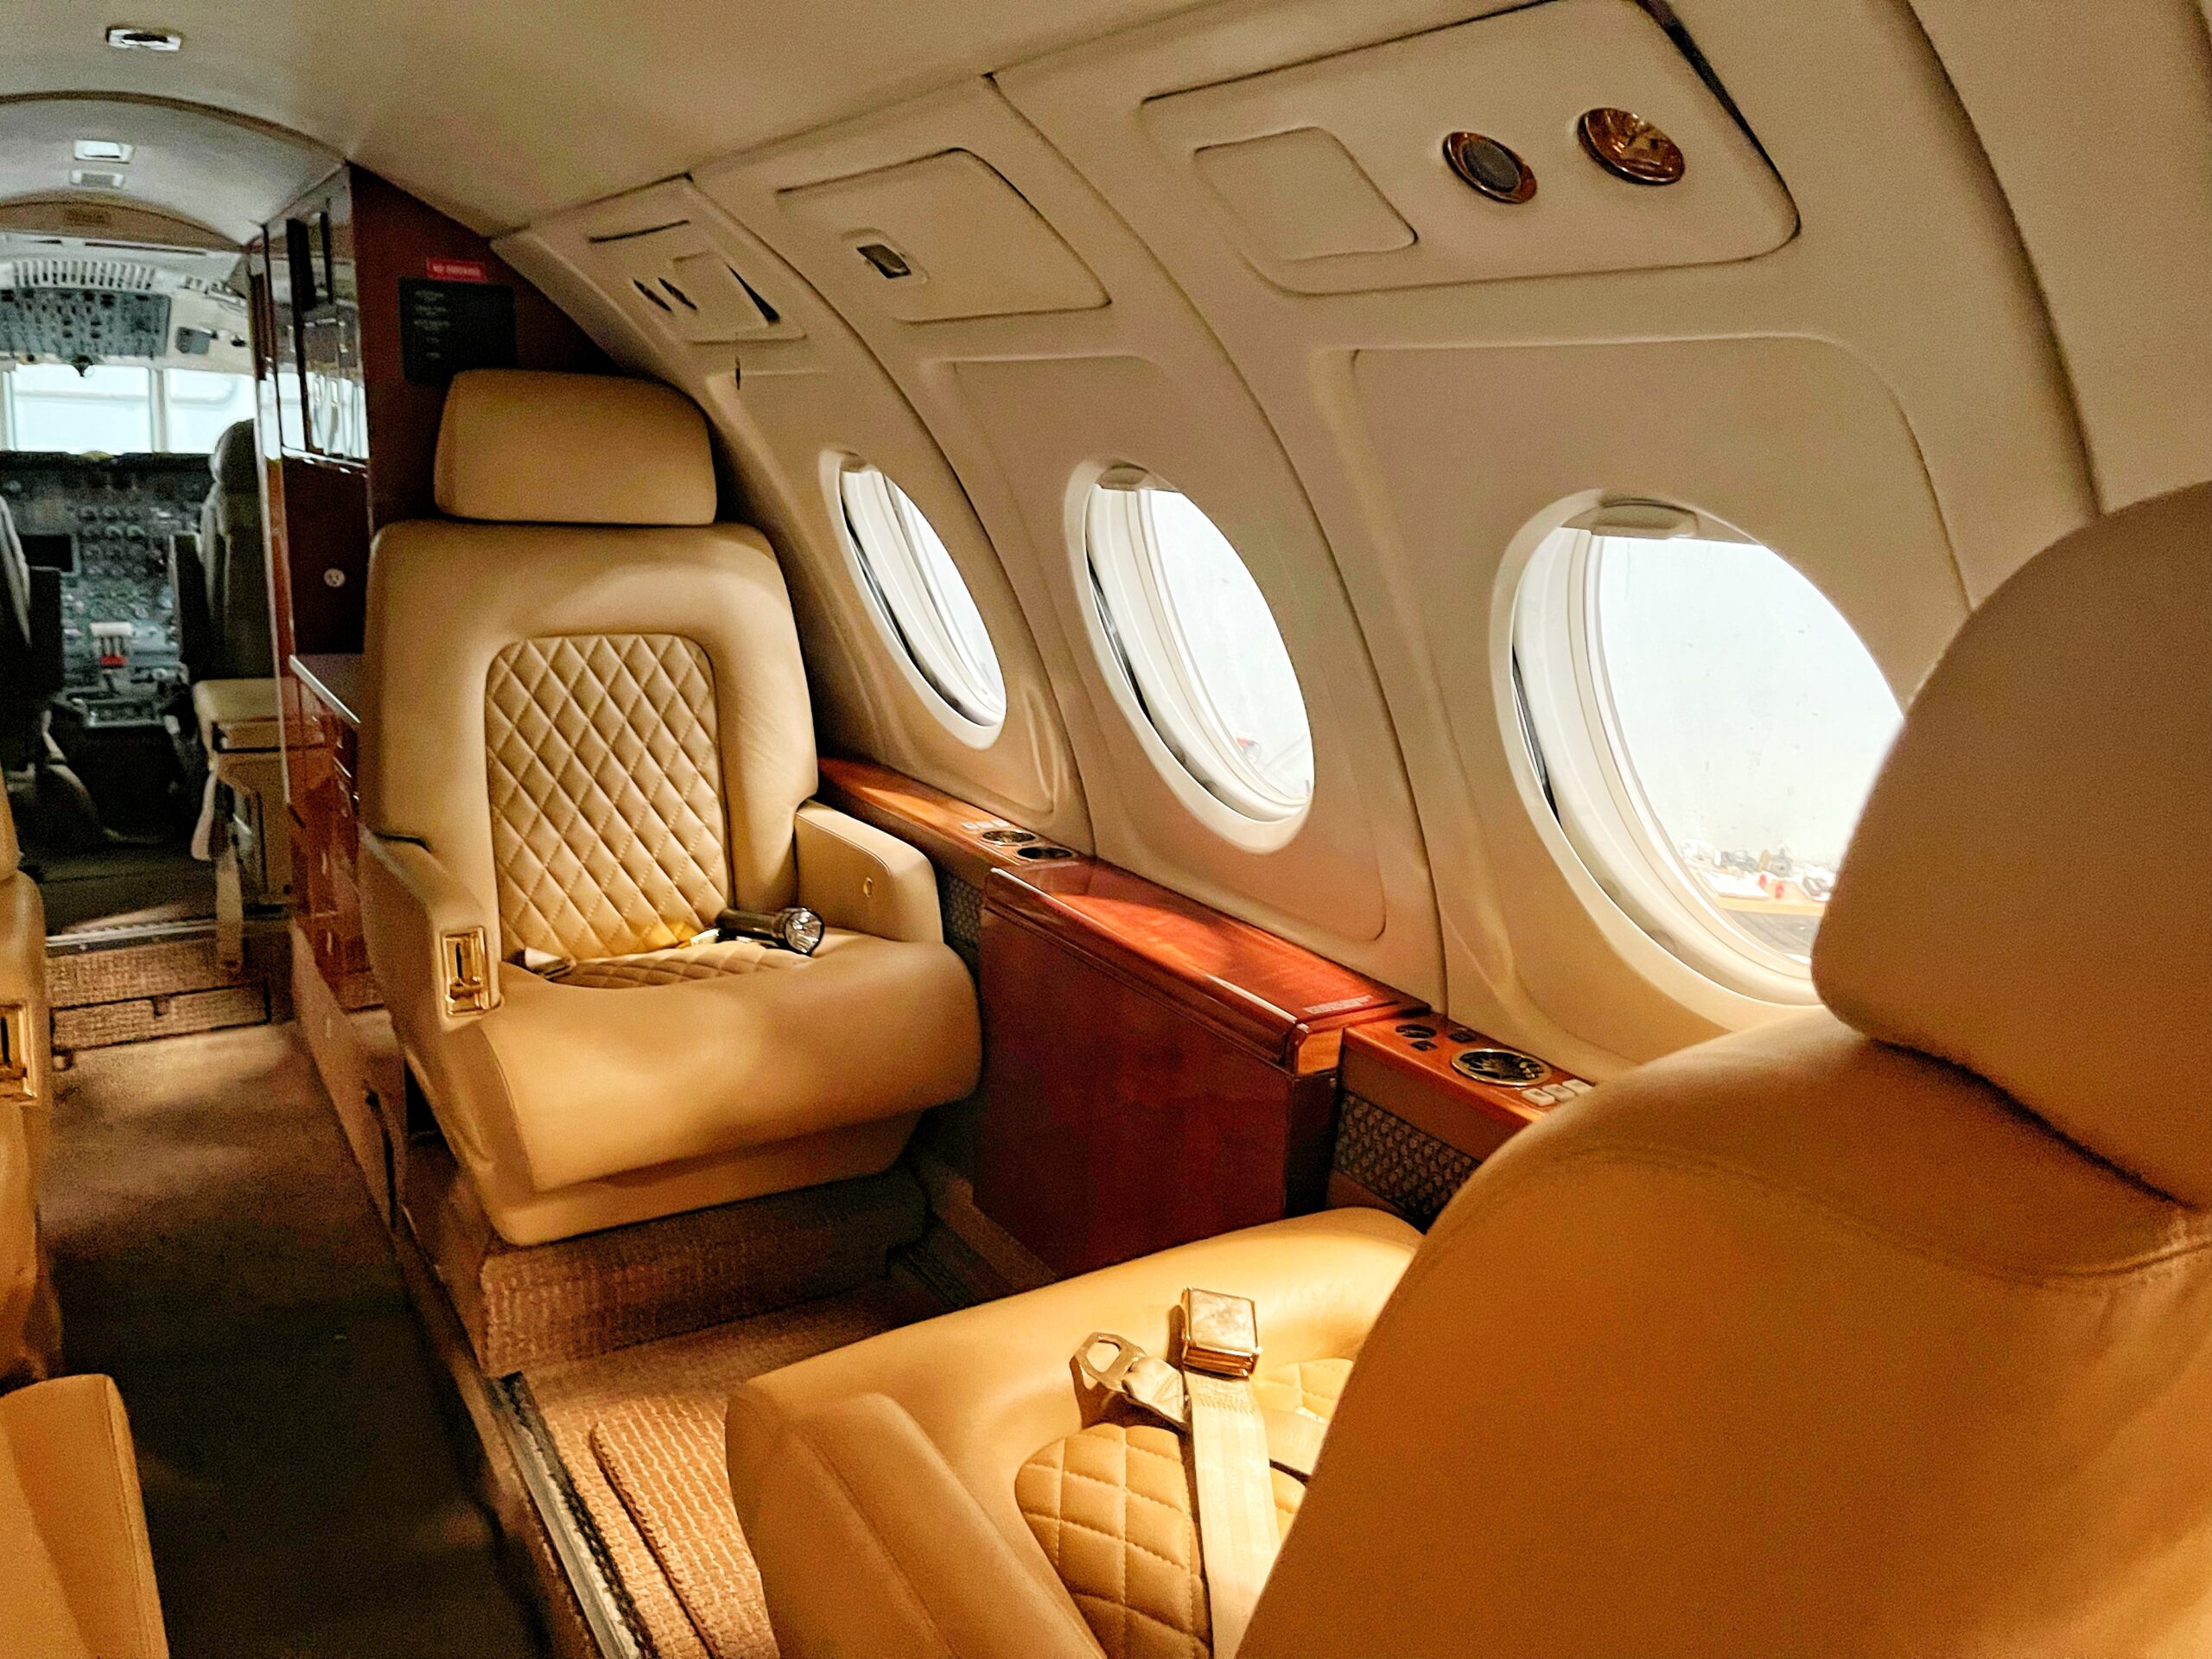 the interior cabin of a private jet. Mustard color leather seats with red carpeting